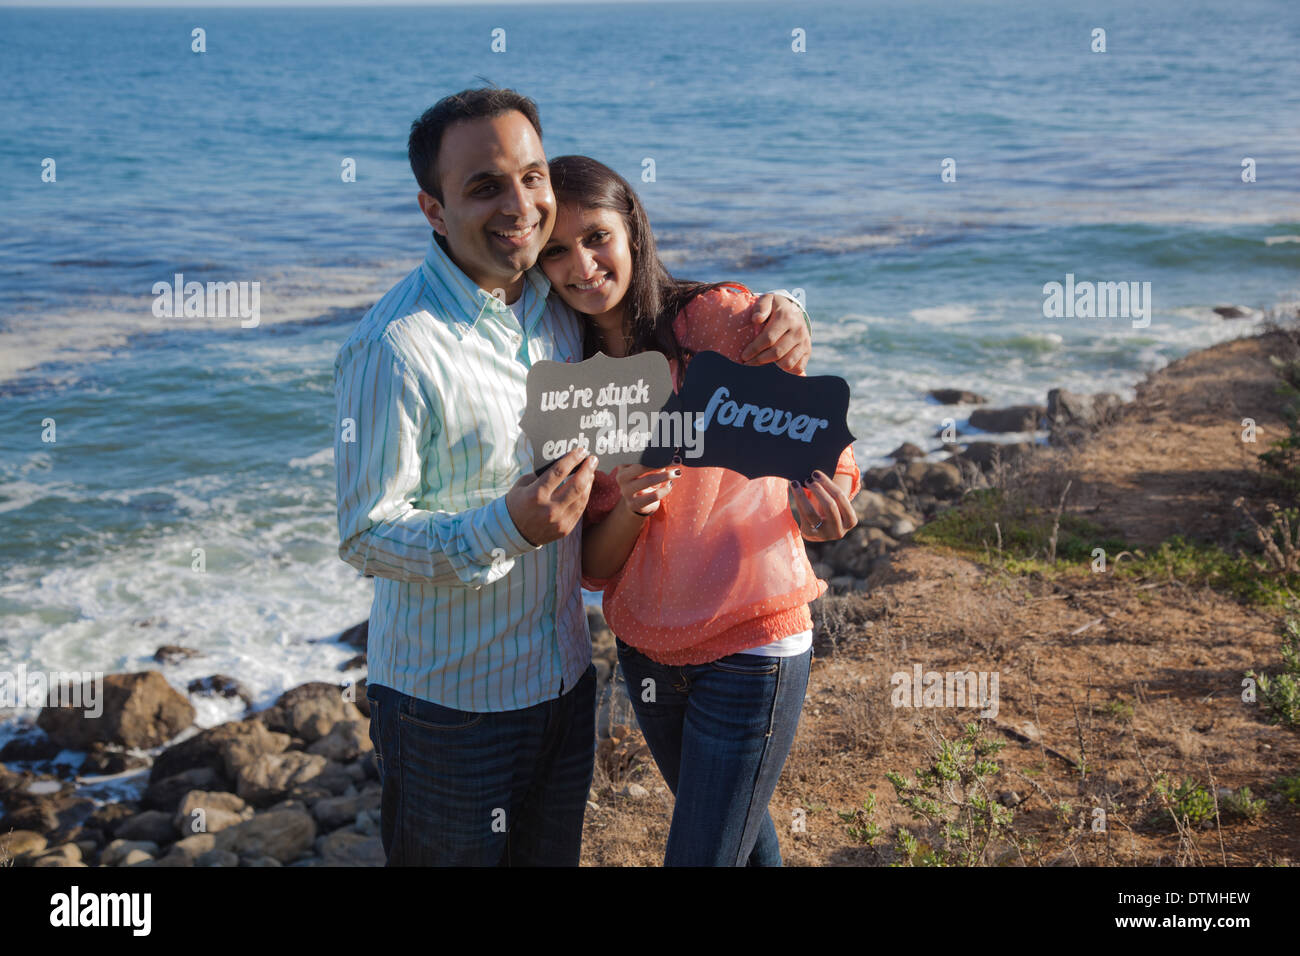 cute indian couple share we're stuck with each other forever signs by the beach ocean sea Stock Photo